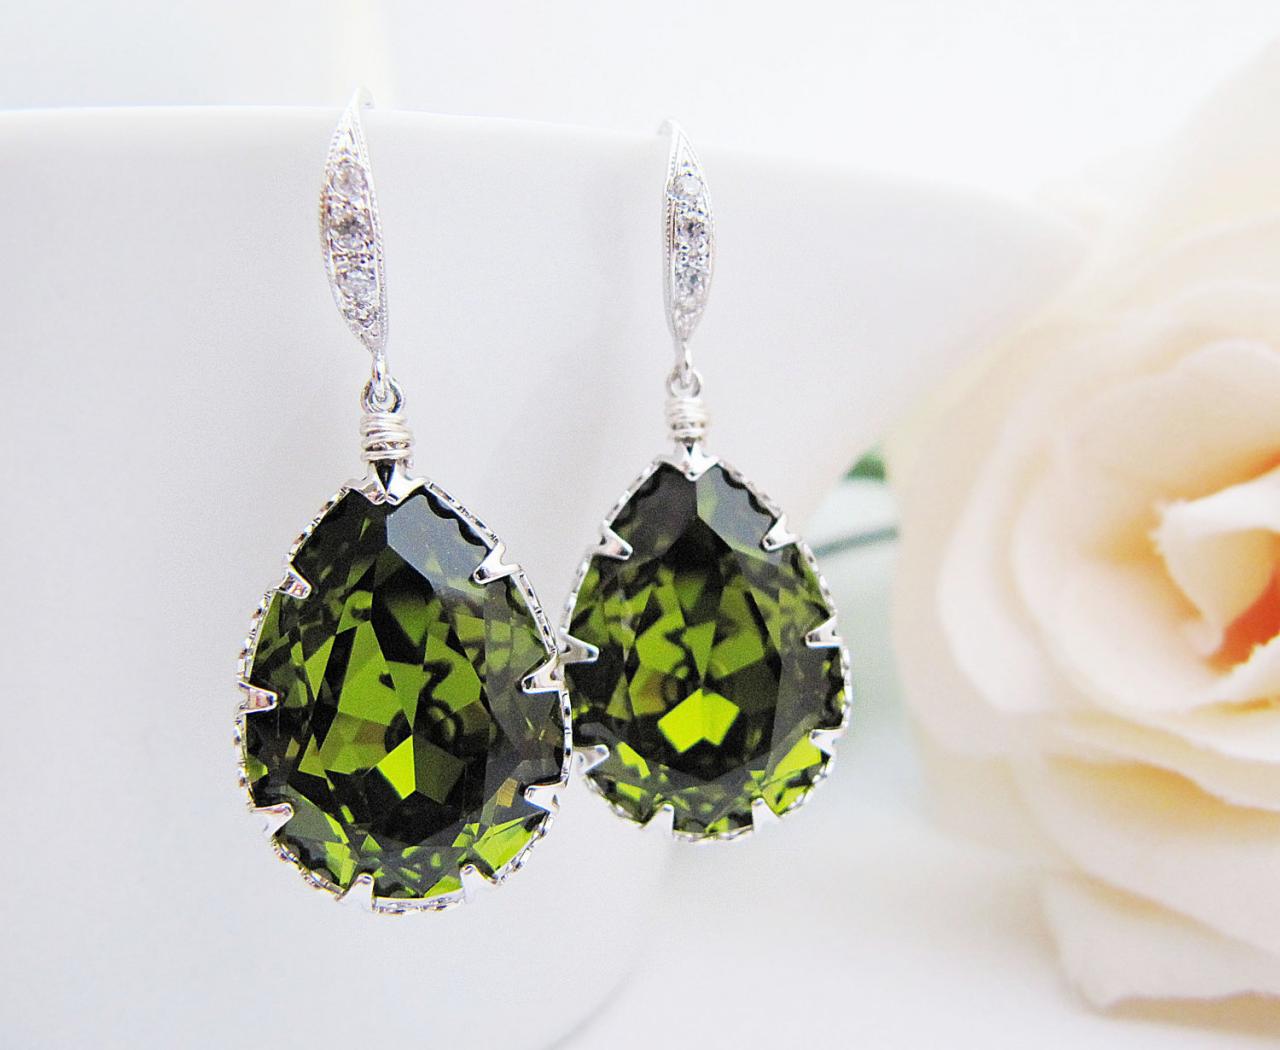 Bridal Earrings Bridesmaid Earrings Cubic Zirconia Ear Wires And Olivine Olive Color Swarovski Crystal Tear Drops